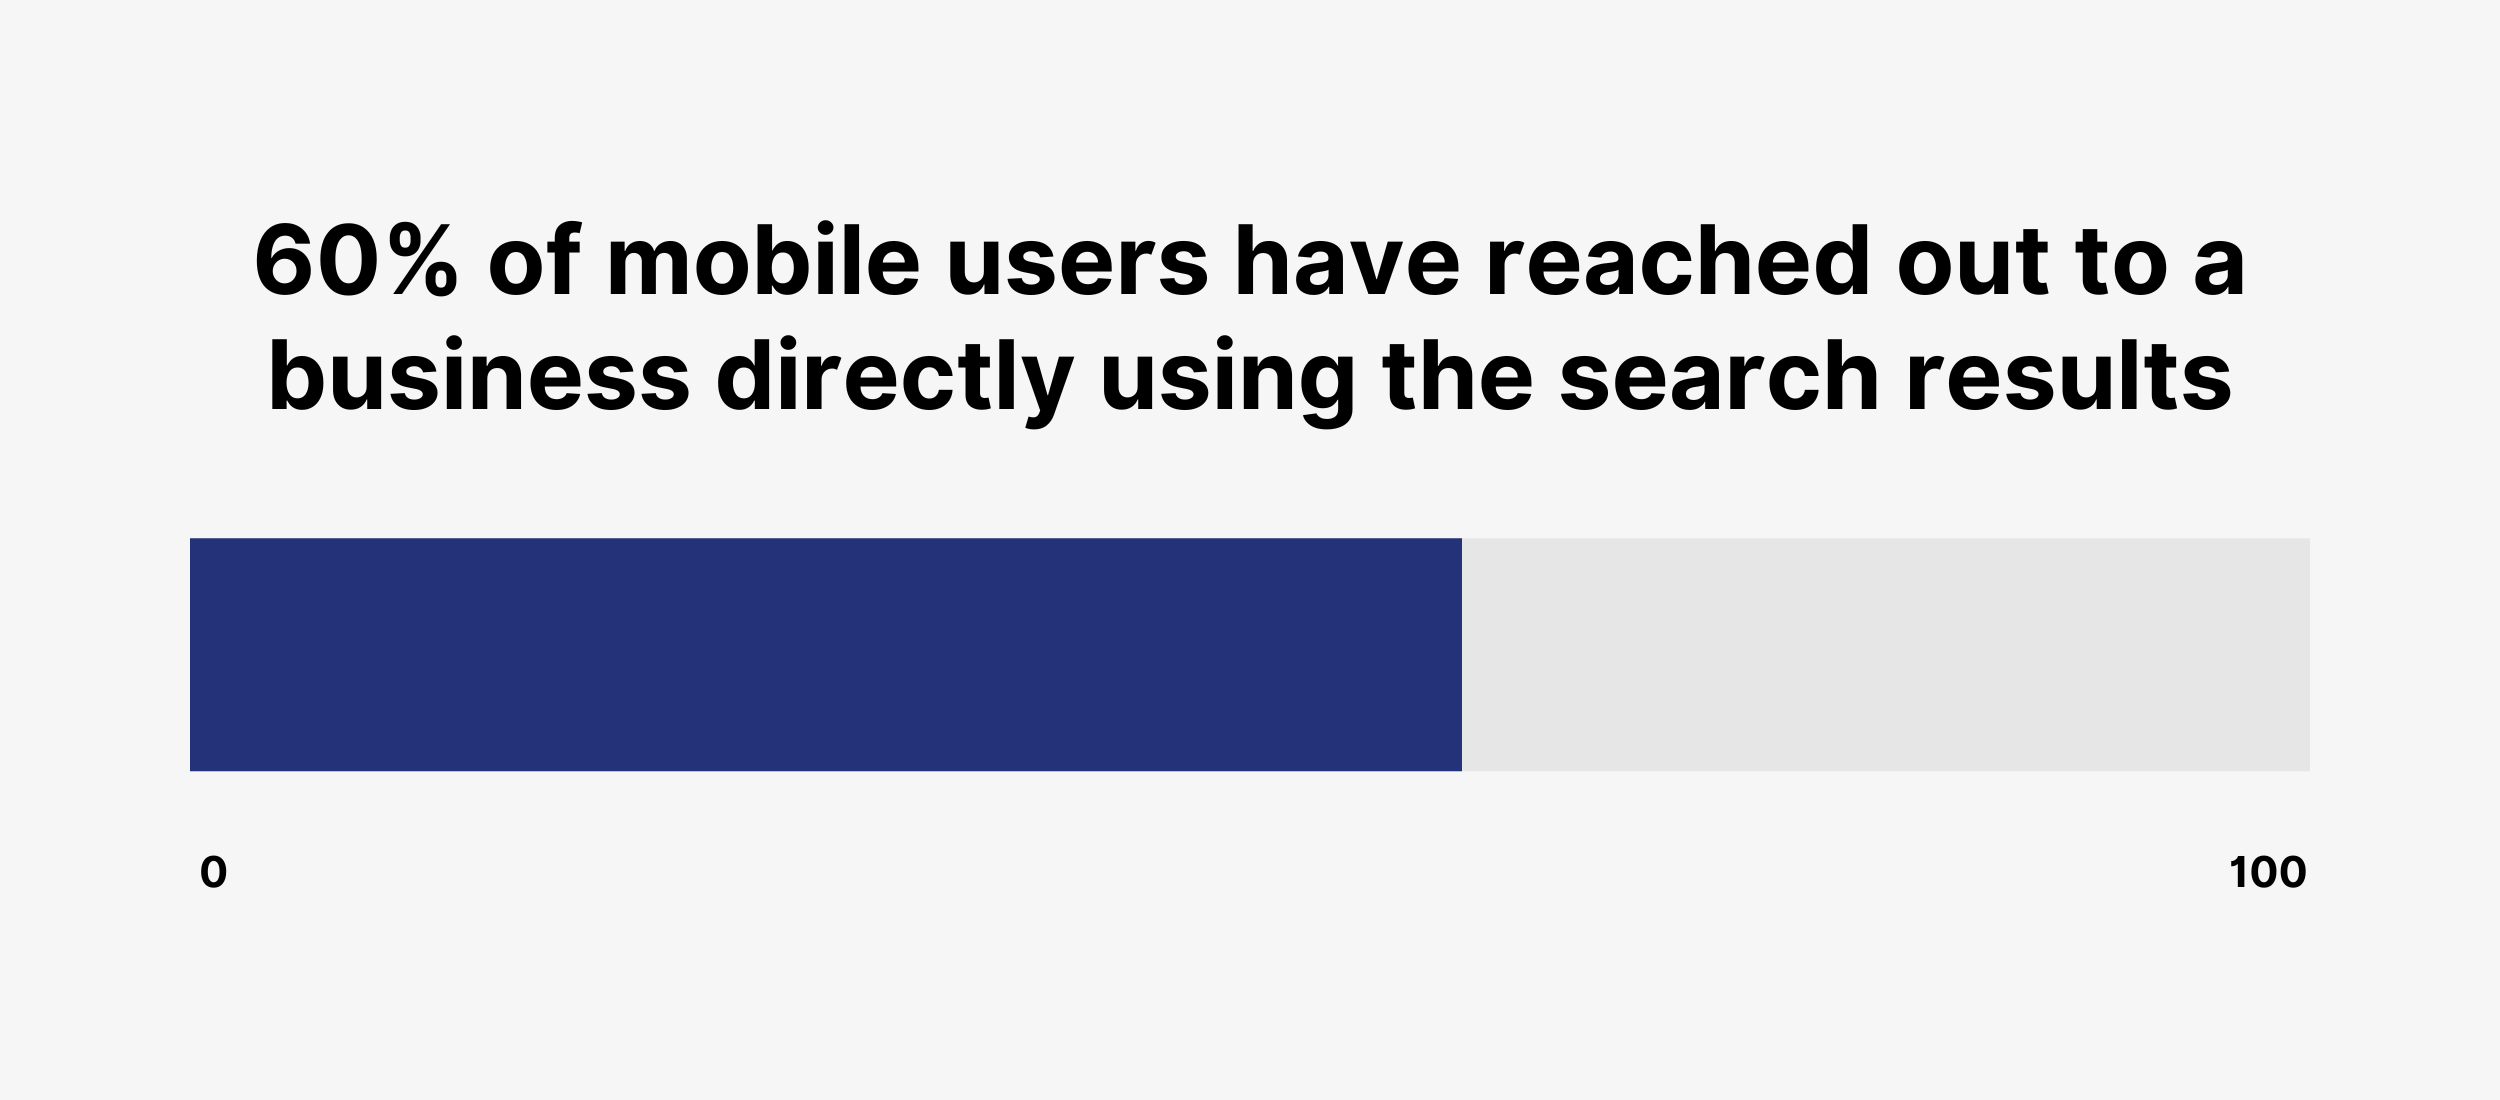 60% of mobile users have reached out to a business directly using the search results